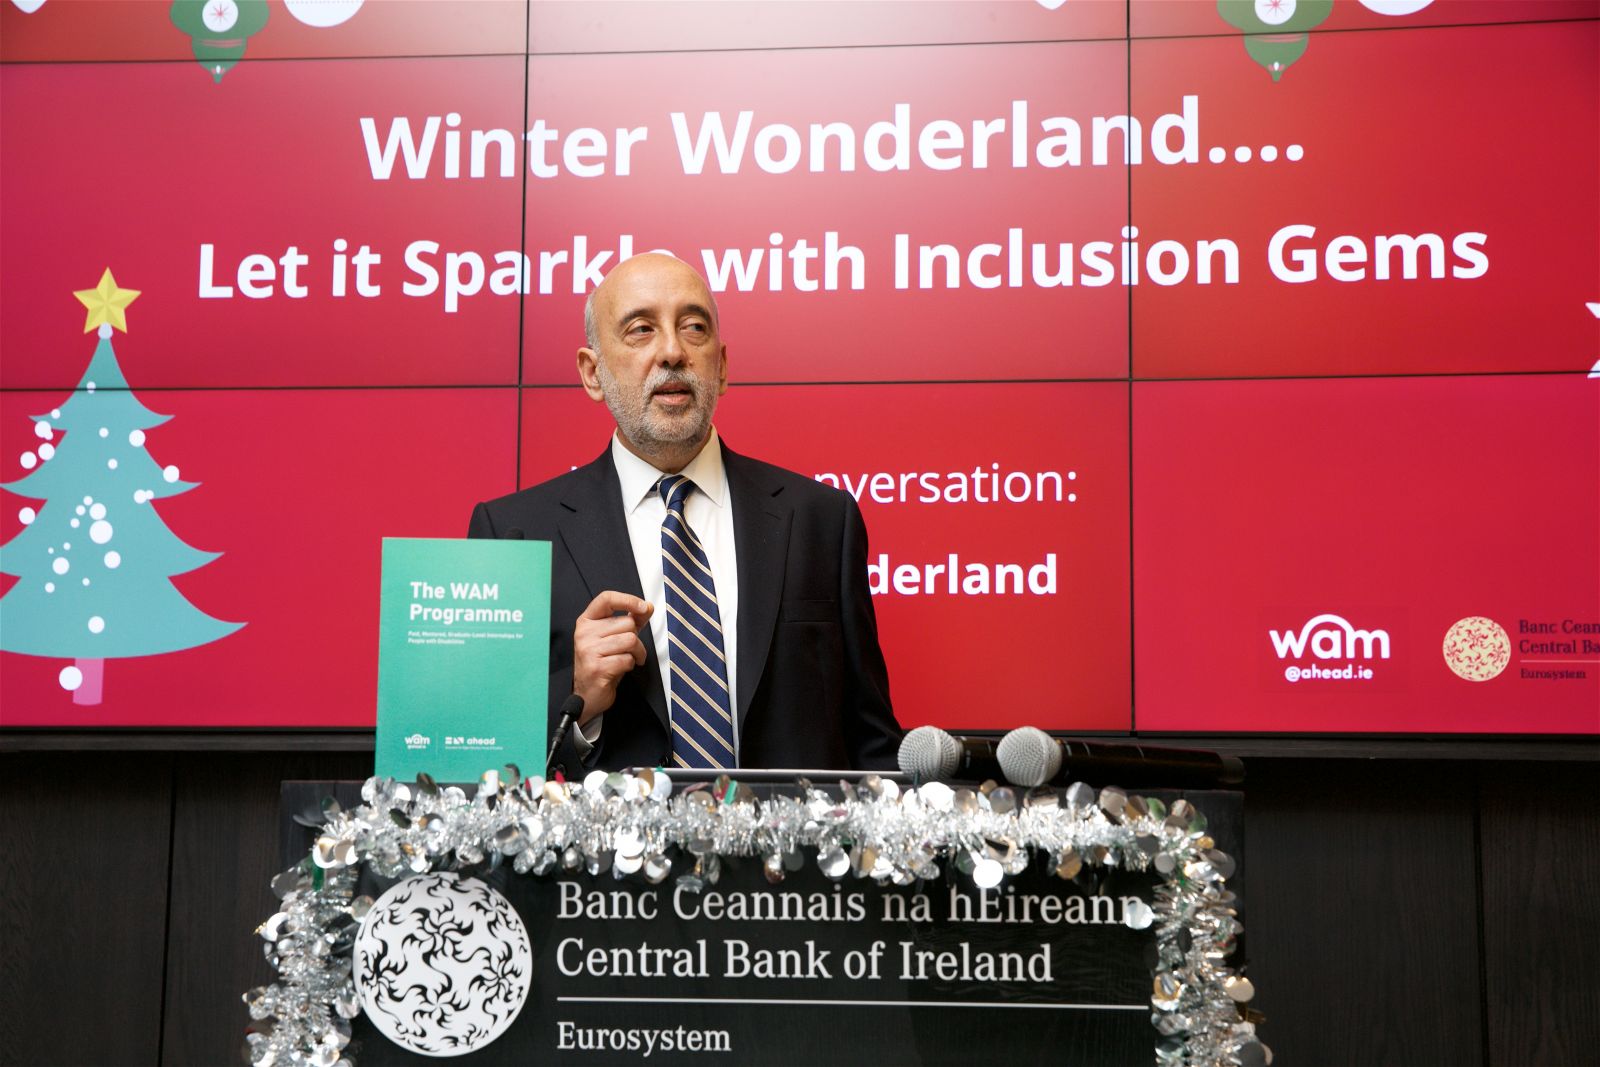 Gabriel Makhlouf - Governor of Central Bank of Ireland speaking at the event